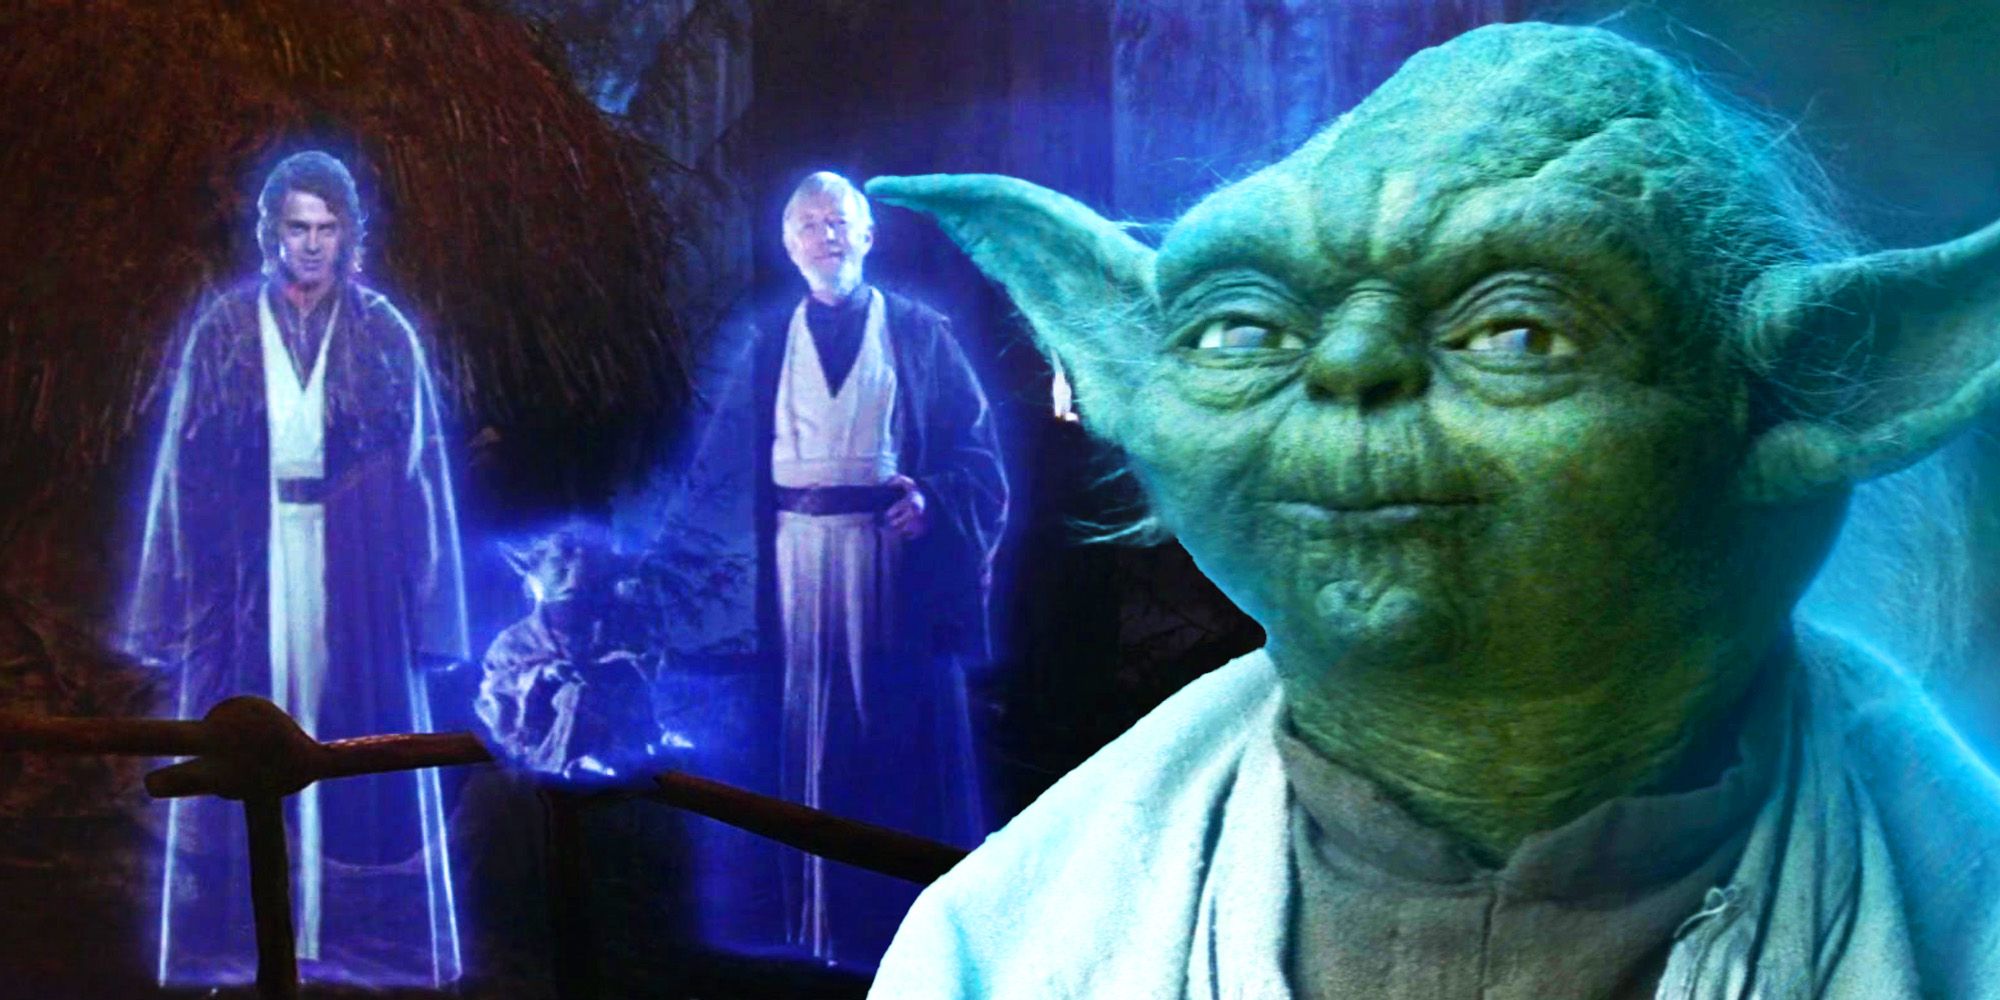 Anakin Skywalker, Obi-Wan Kenobi, and Yoda stand together as Force ghosts in Return of the Jedi with Yoda's The Last Jedi Force ghost